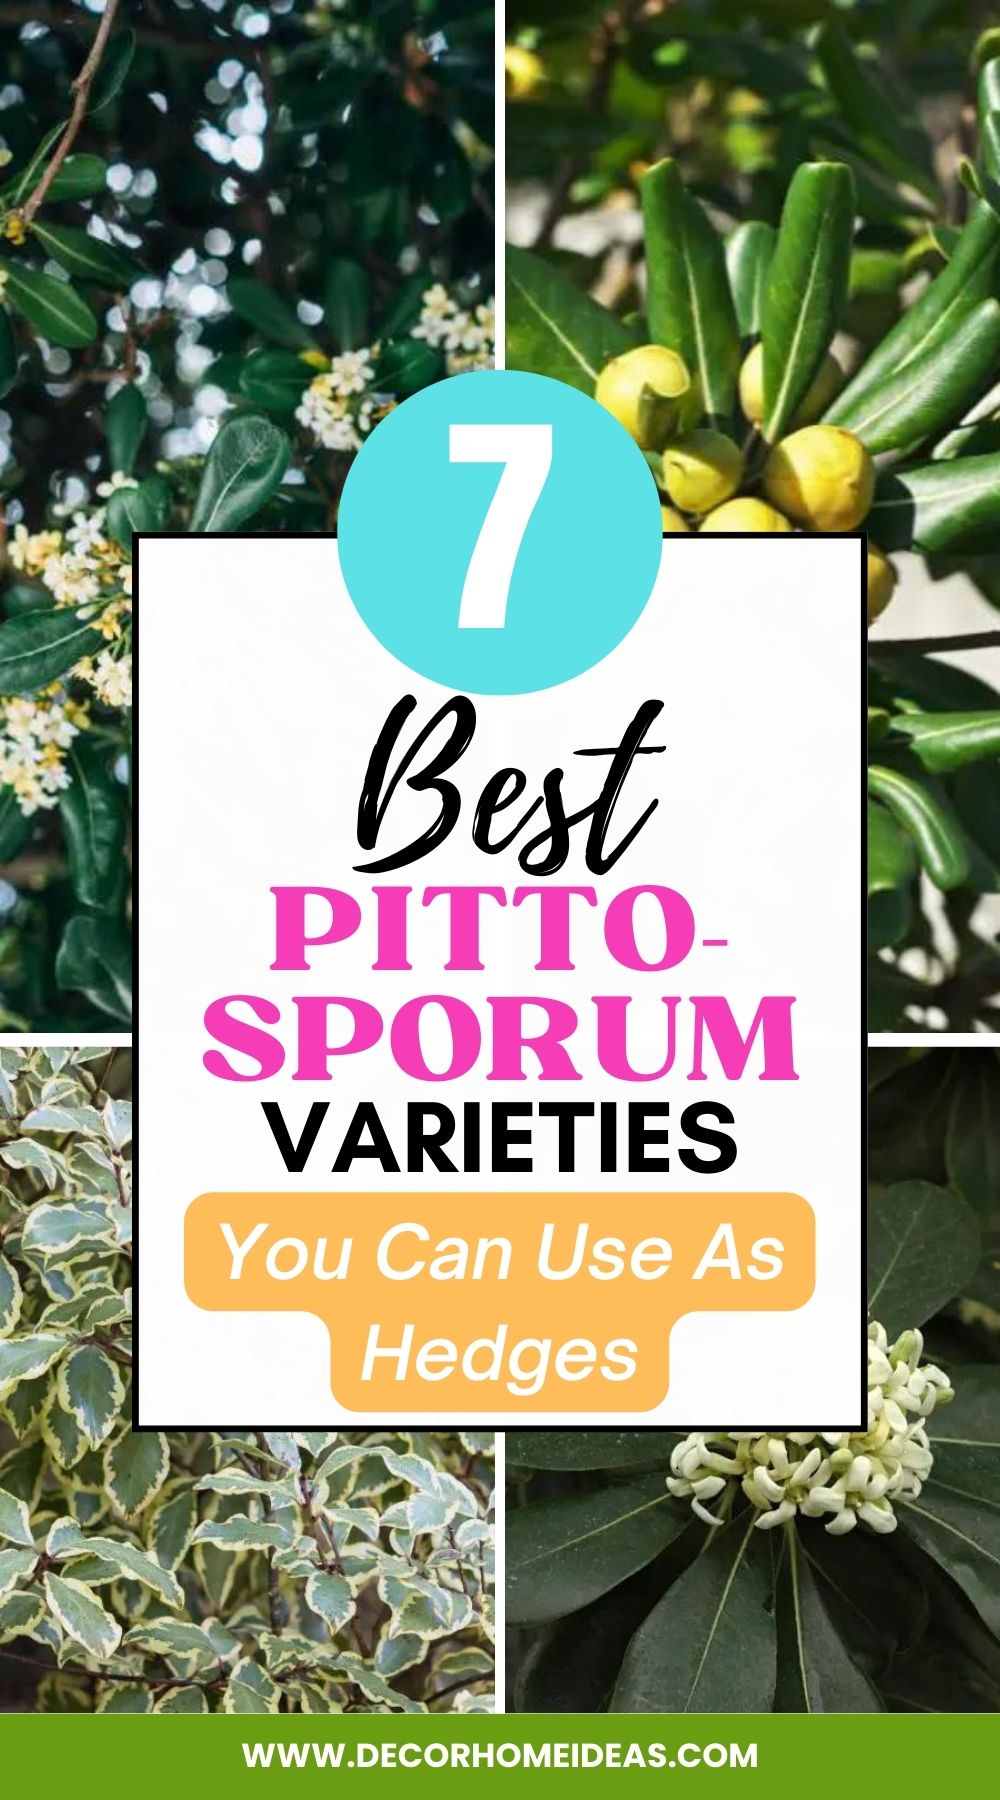 Create a lush and elegant hedge with these 7 ideal Pittosporum varieties perfectly suited for the purpose. Explore their unique characteristics and find the perfect Pittosporum hedge to enhance your landscape with beauty and privacy.